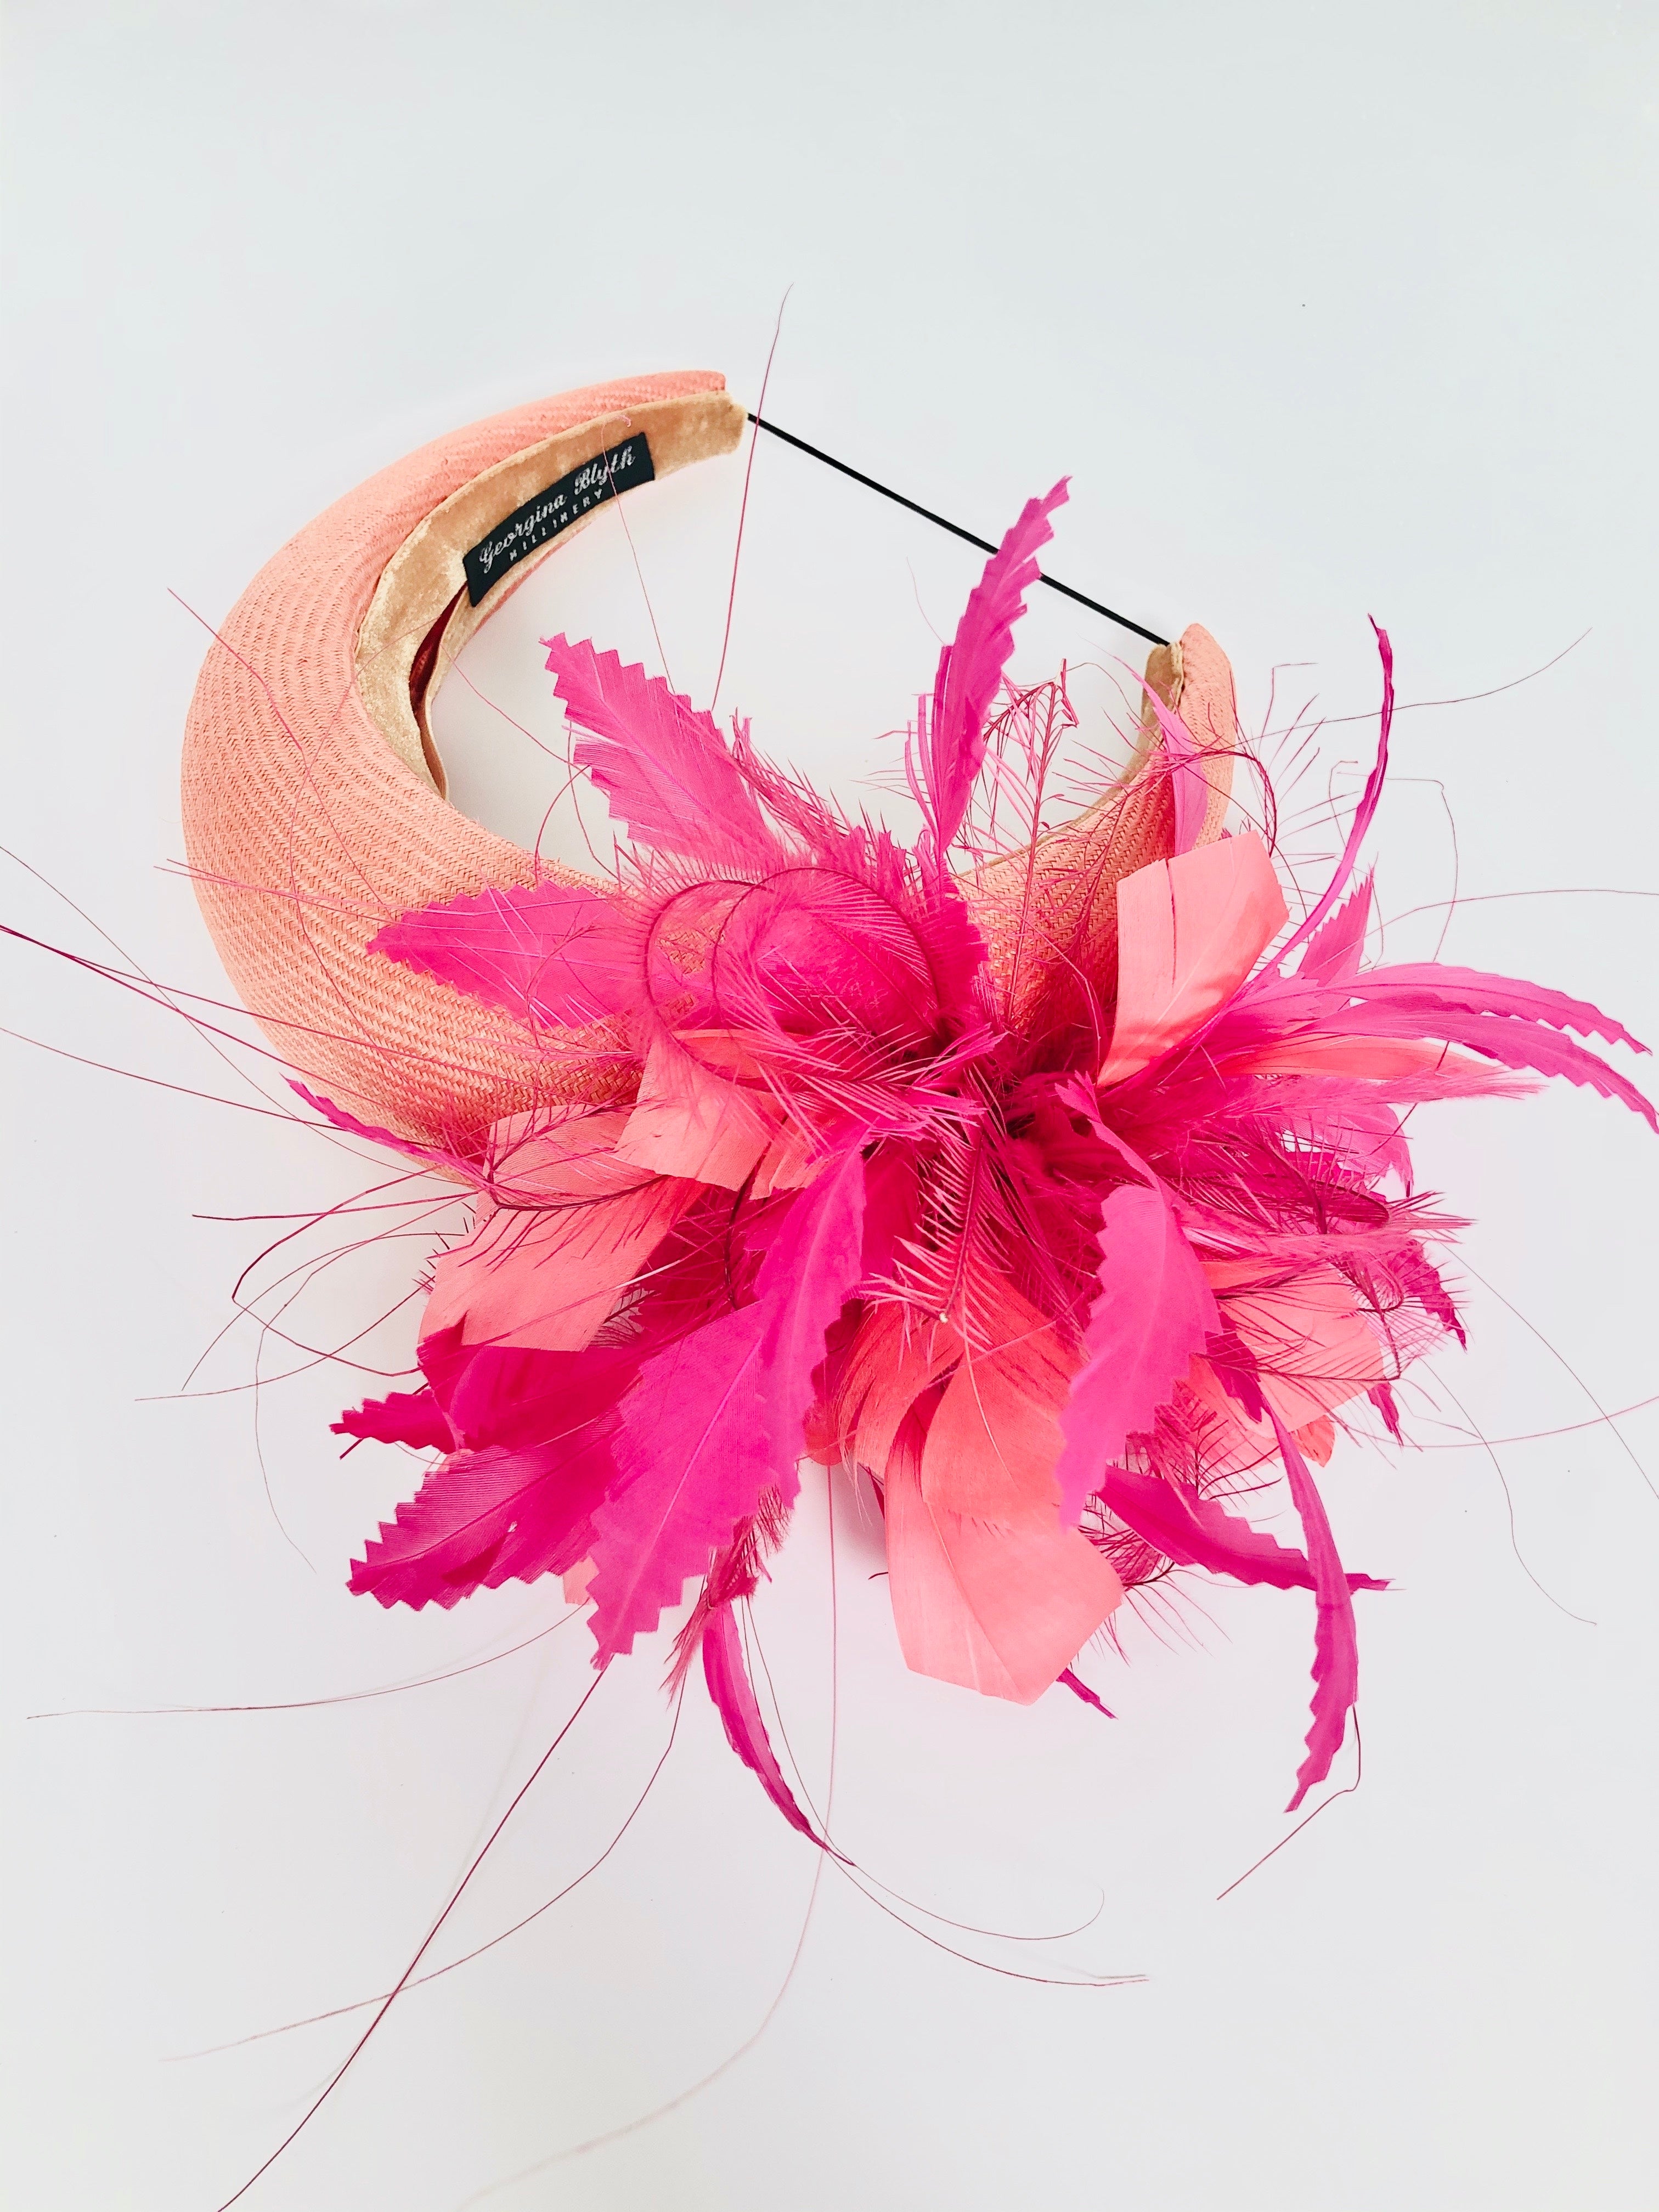 orange and pink straw padded wide headband, kate middleton style with vibrant feather spray, halo crown, ideal for races or wedding hat